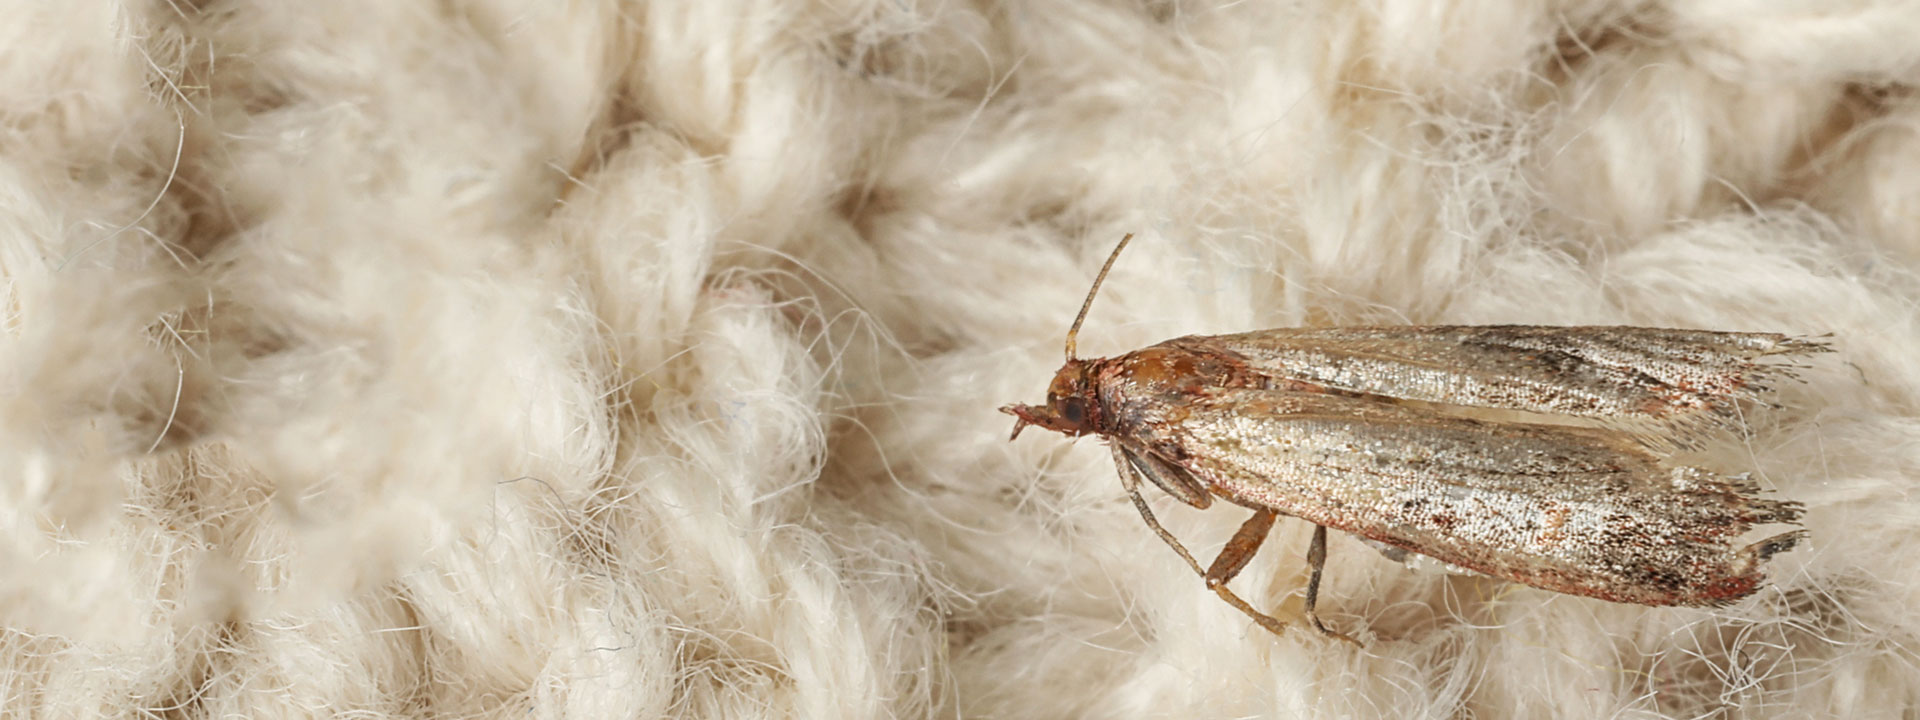 A Webbing Clothes Moth on a knit blanket.